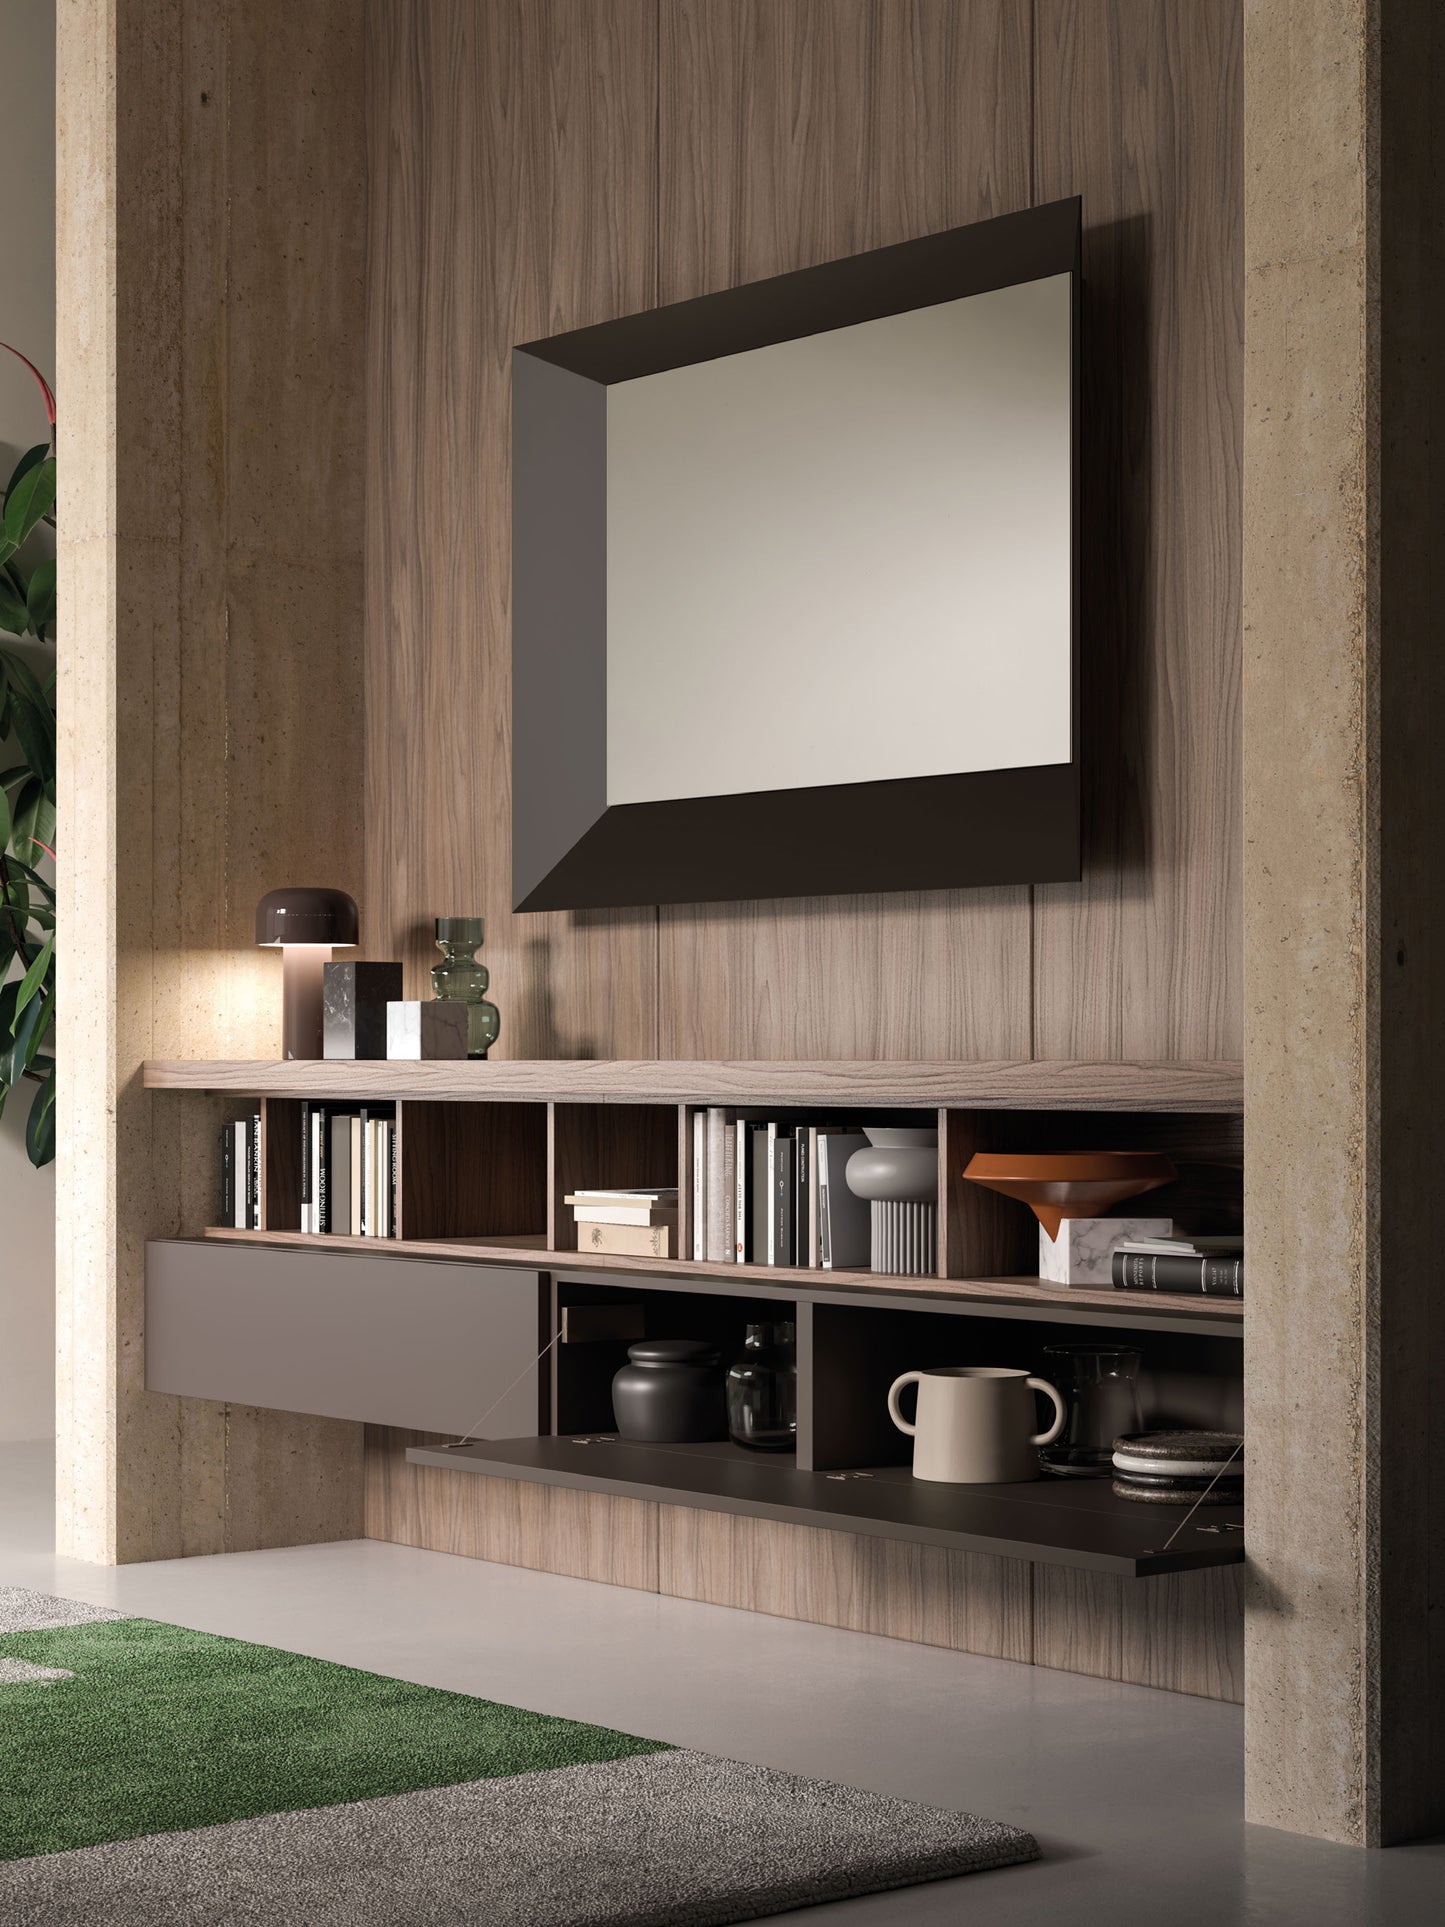 Day 12-23 Bookcase/ TV Wall Unit by Orme Design